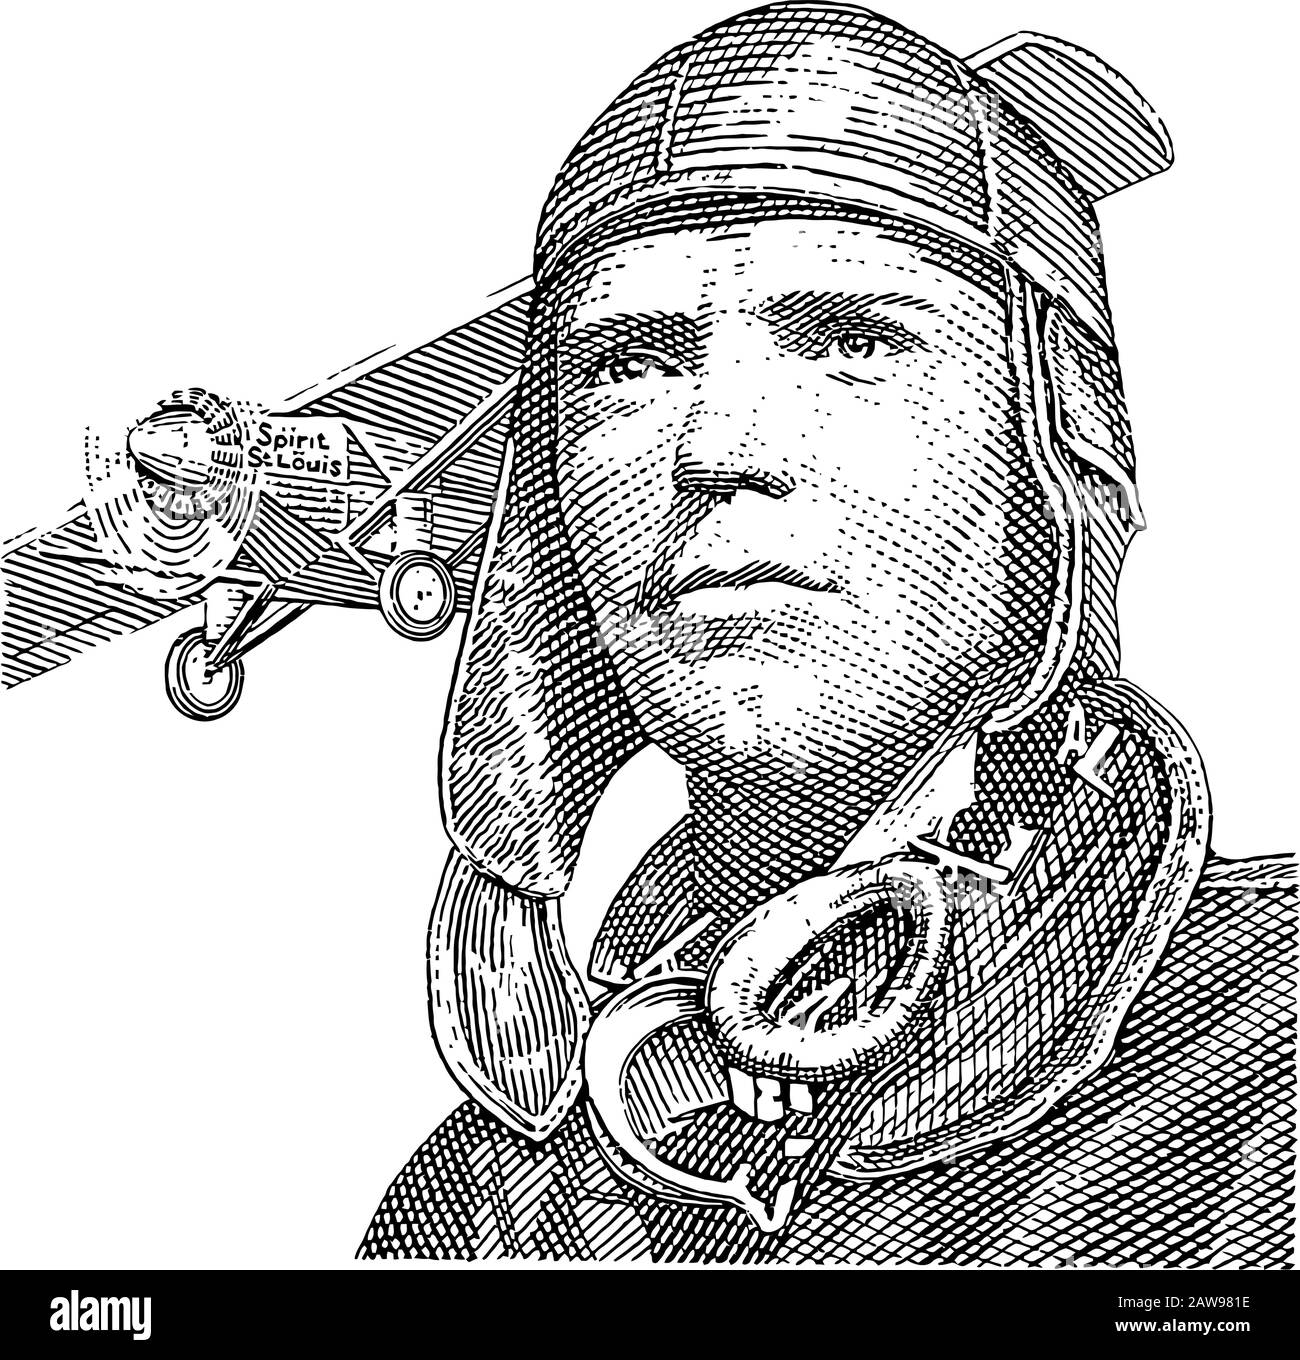 Charles Augustus Lindbergh was an American aviator, military officer, author, inventor, and activist. Stock Vector